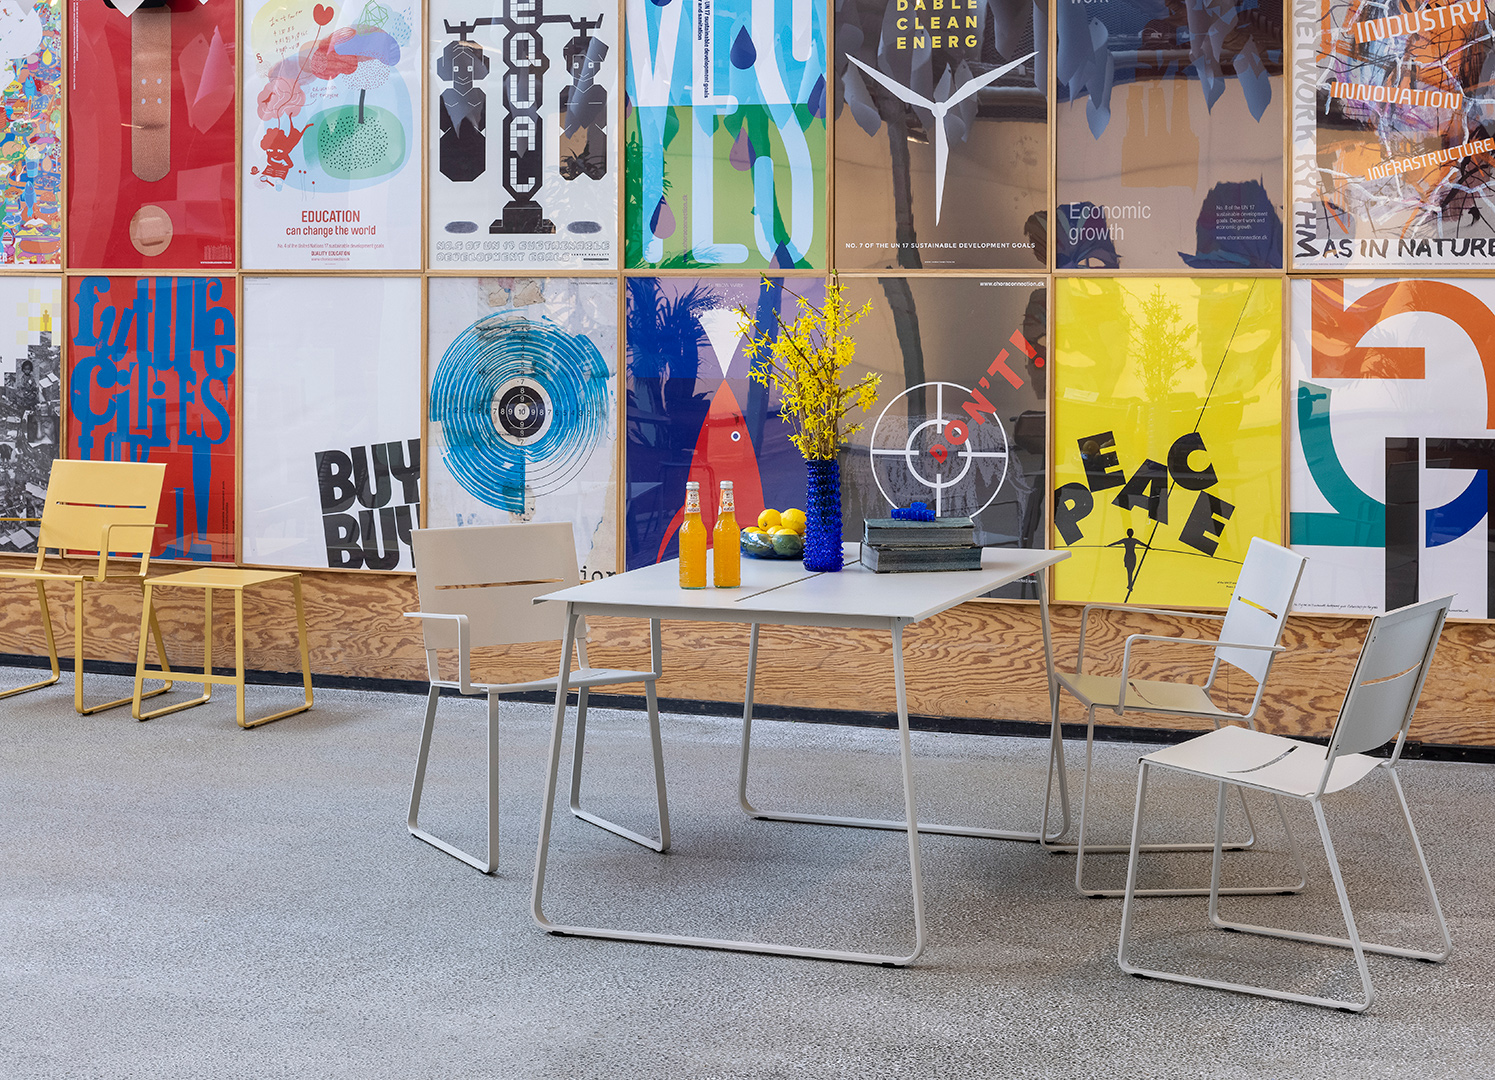 Steel furniture in front of a wall of posters